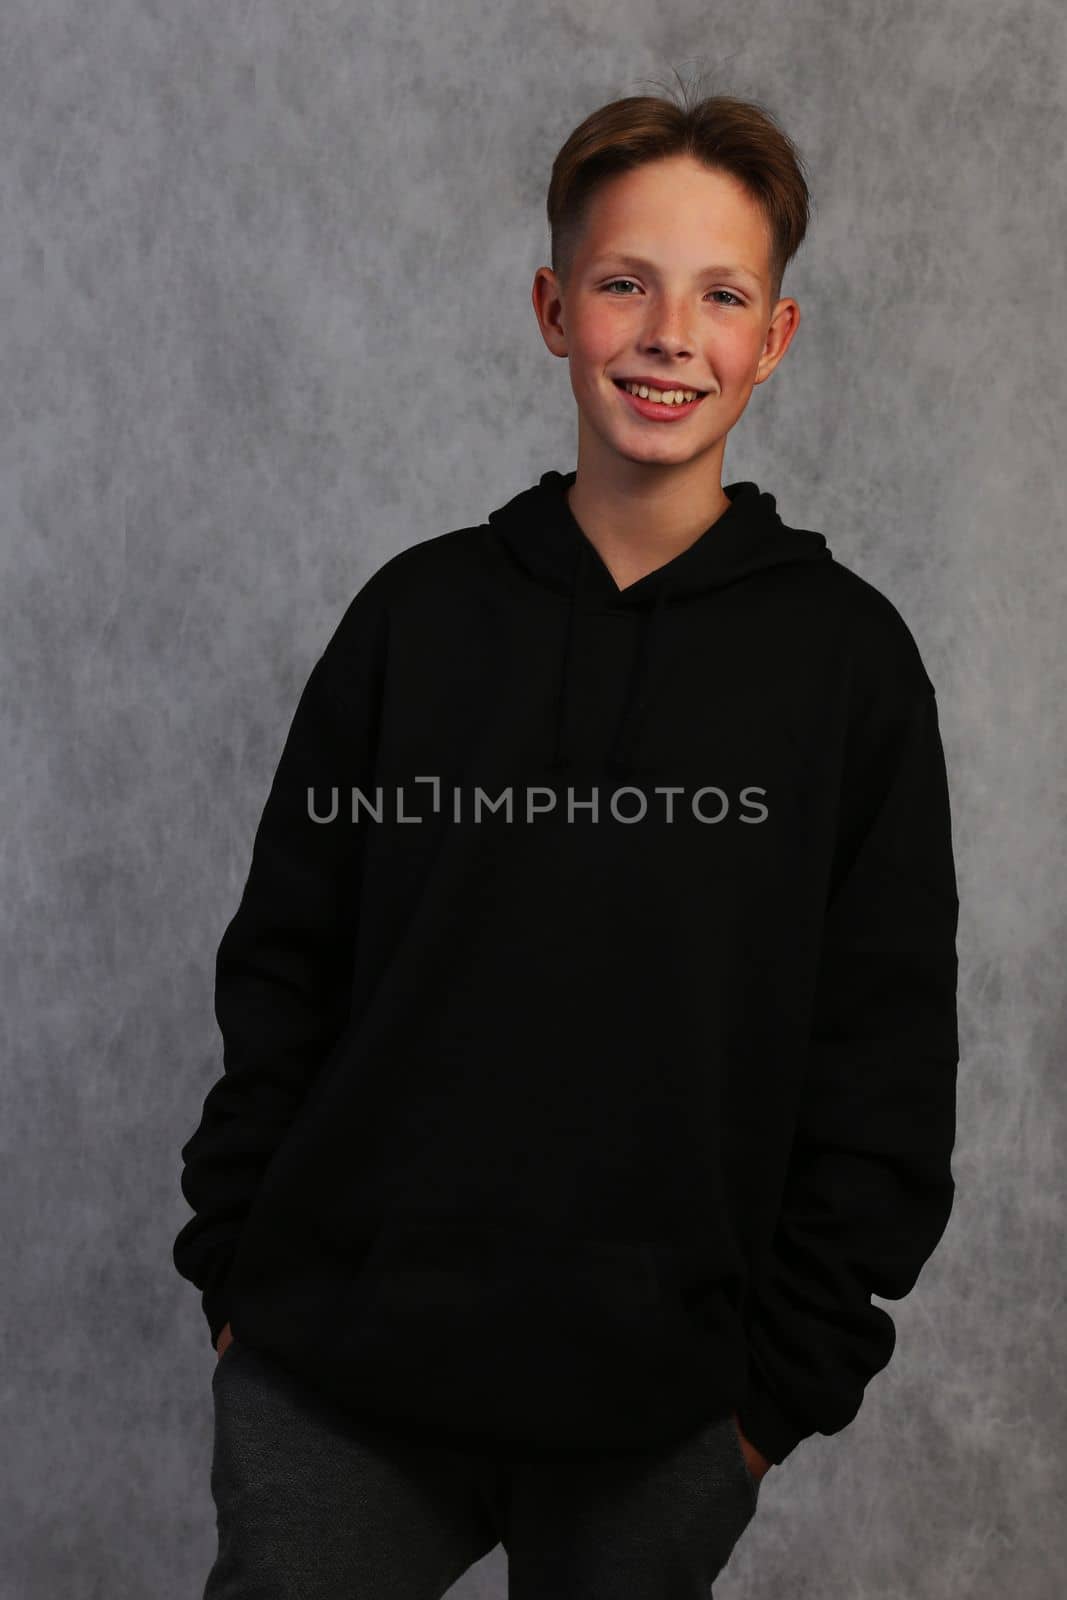 The boy poses holding his hands in his pockets. A boy in a sweatshirt is posing and smiling on a gray background.